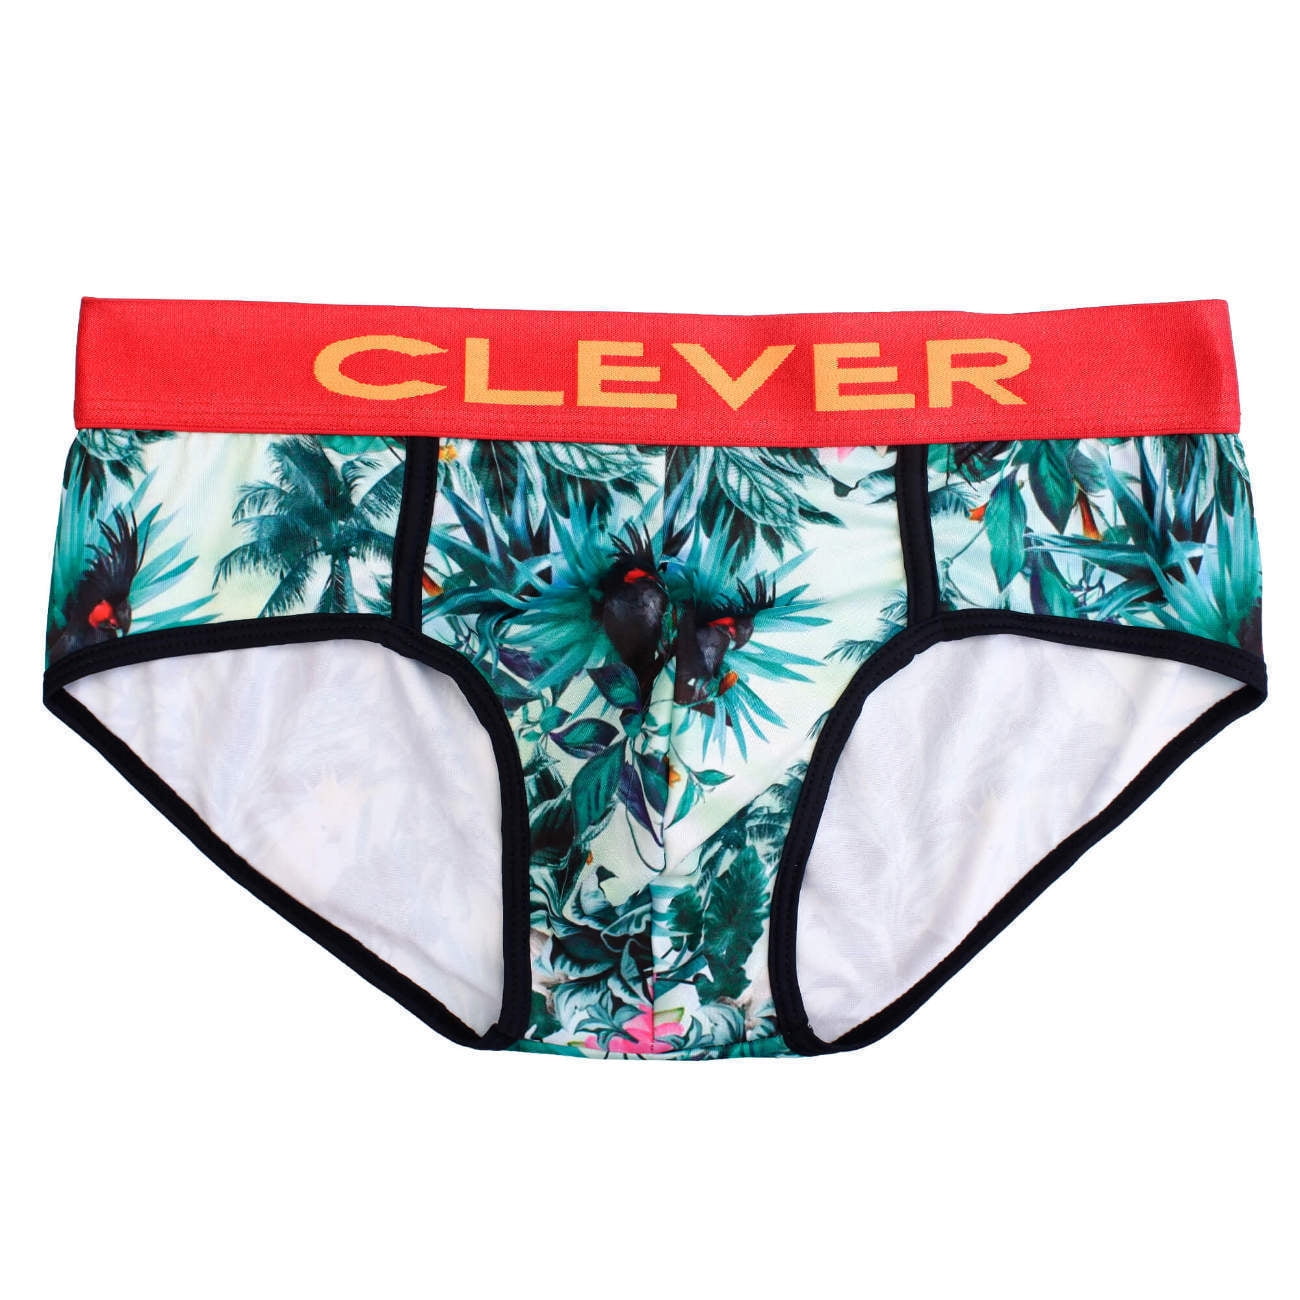 Clever 5260 Exotic Parrot Piping Brief - Walmart.com